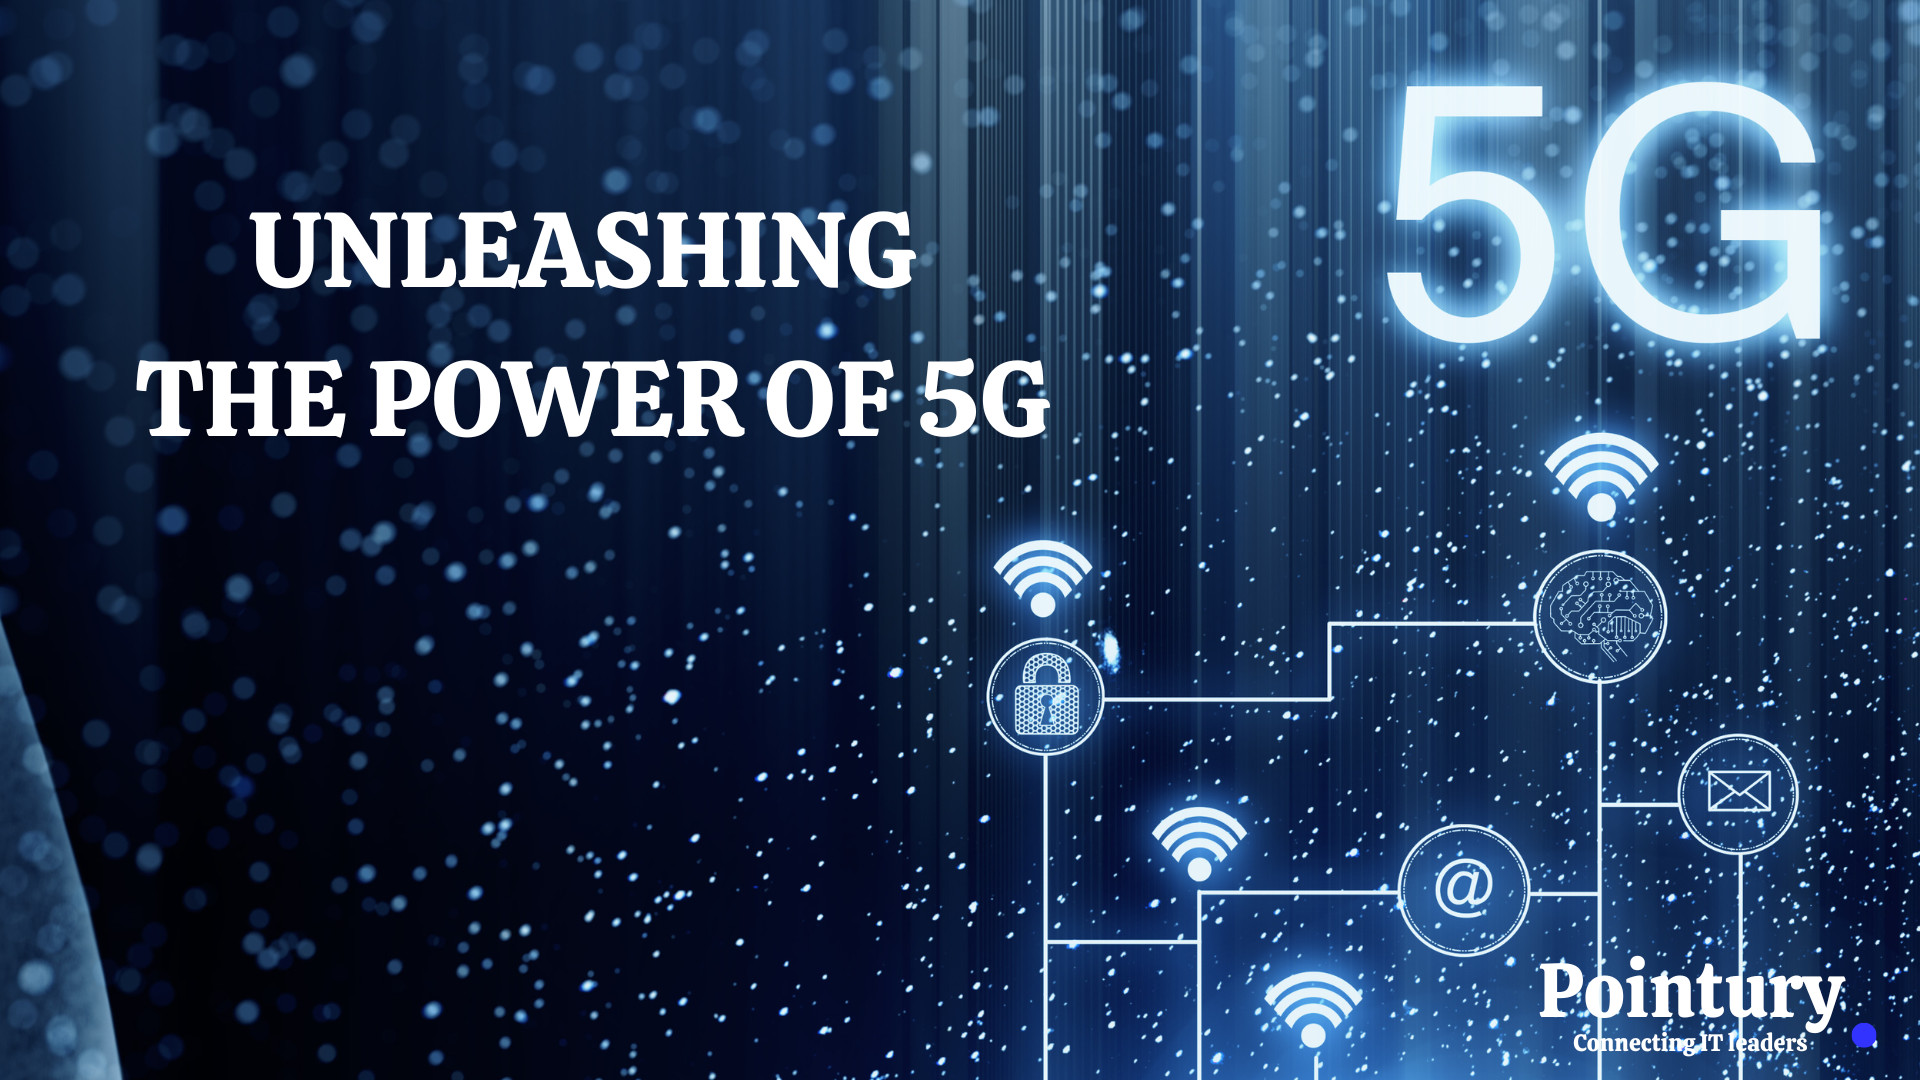 UNLEASHING THE POWER OF 5G